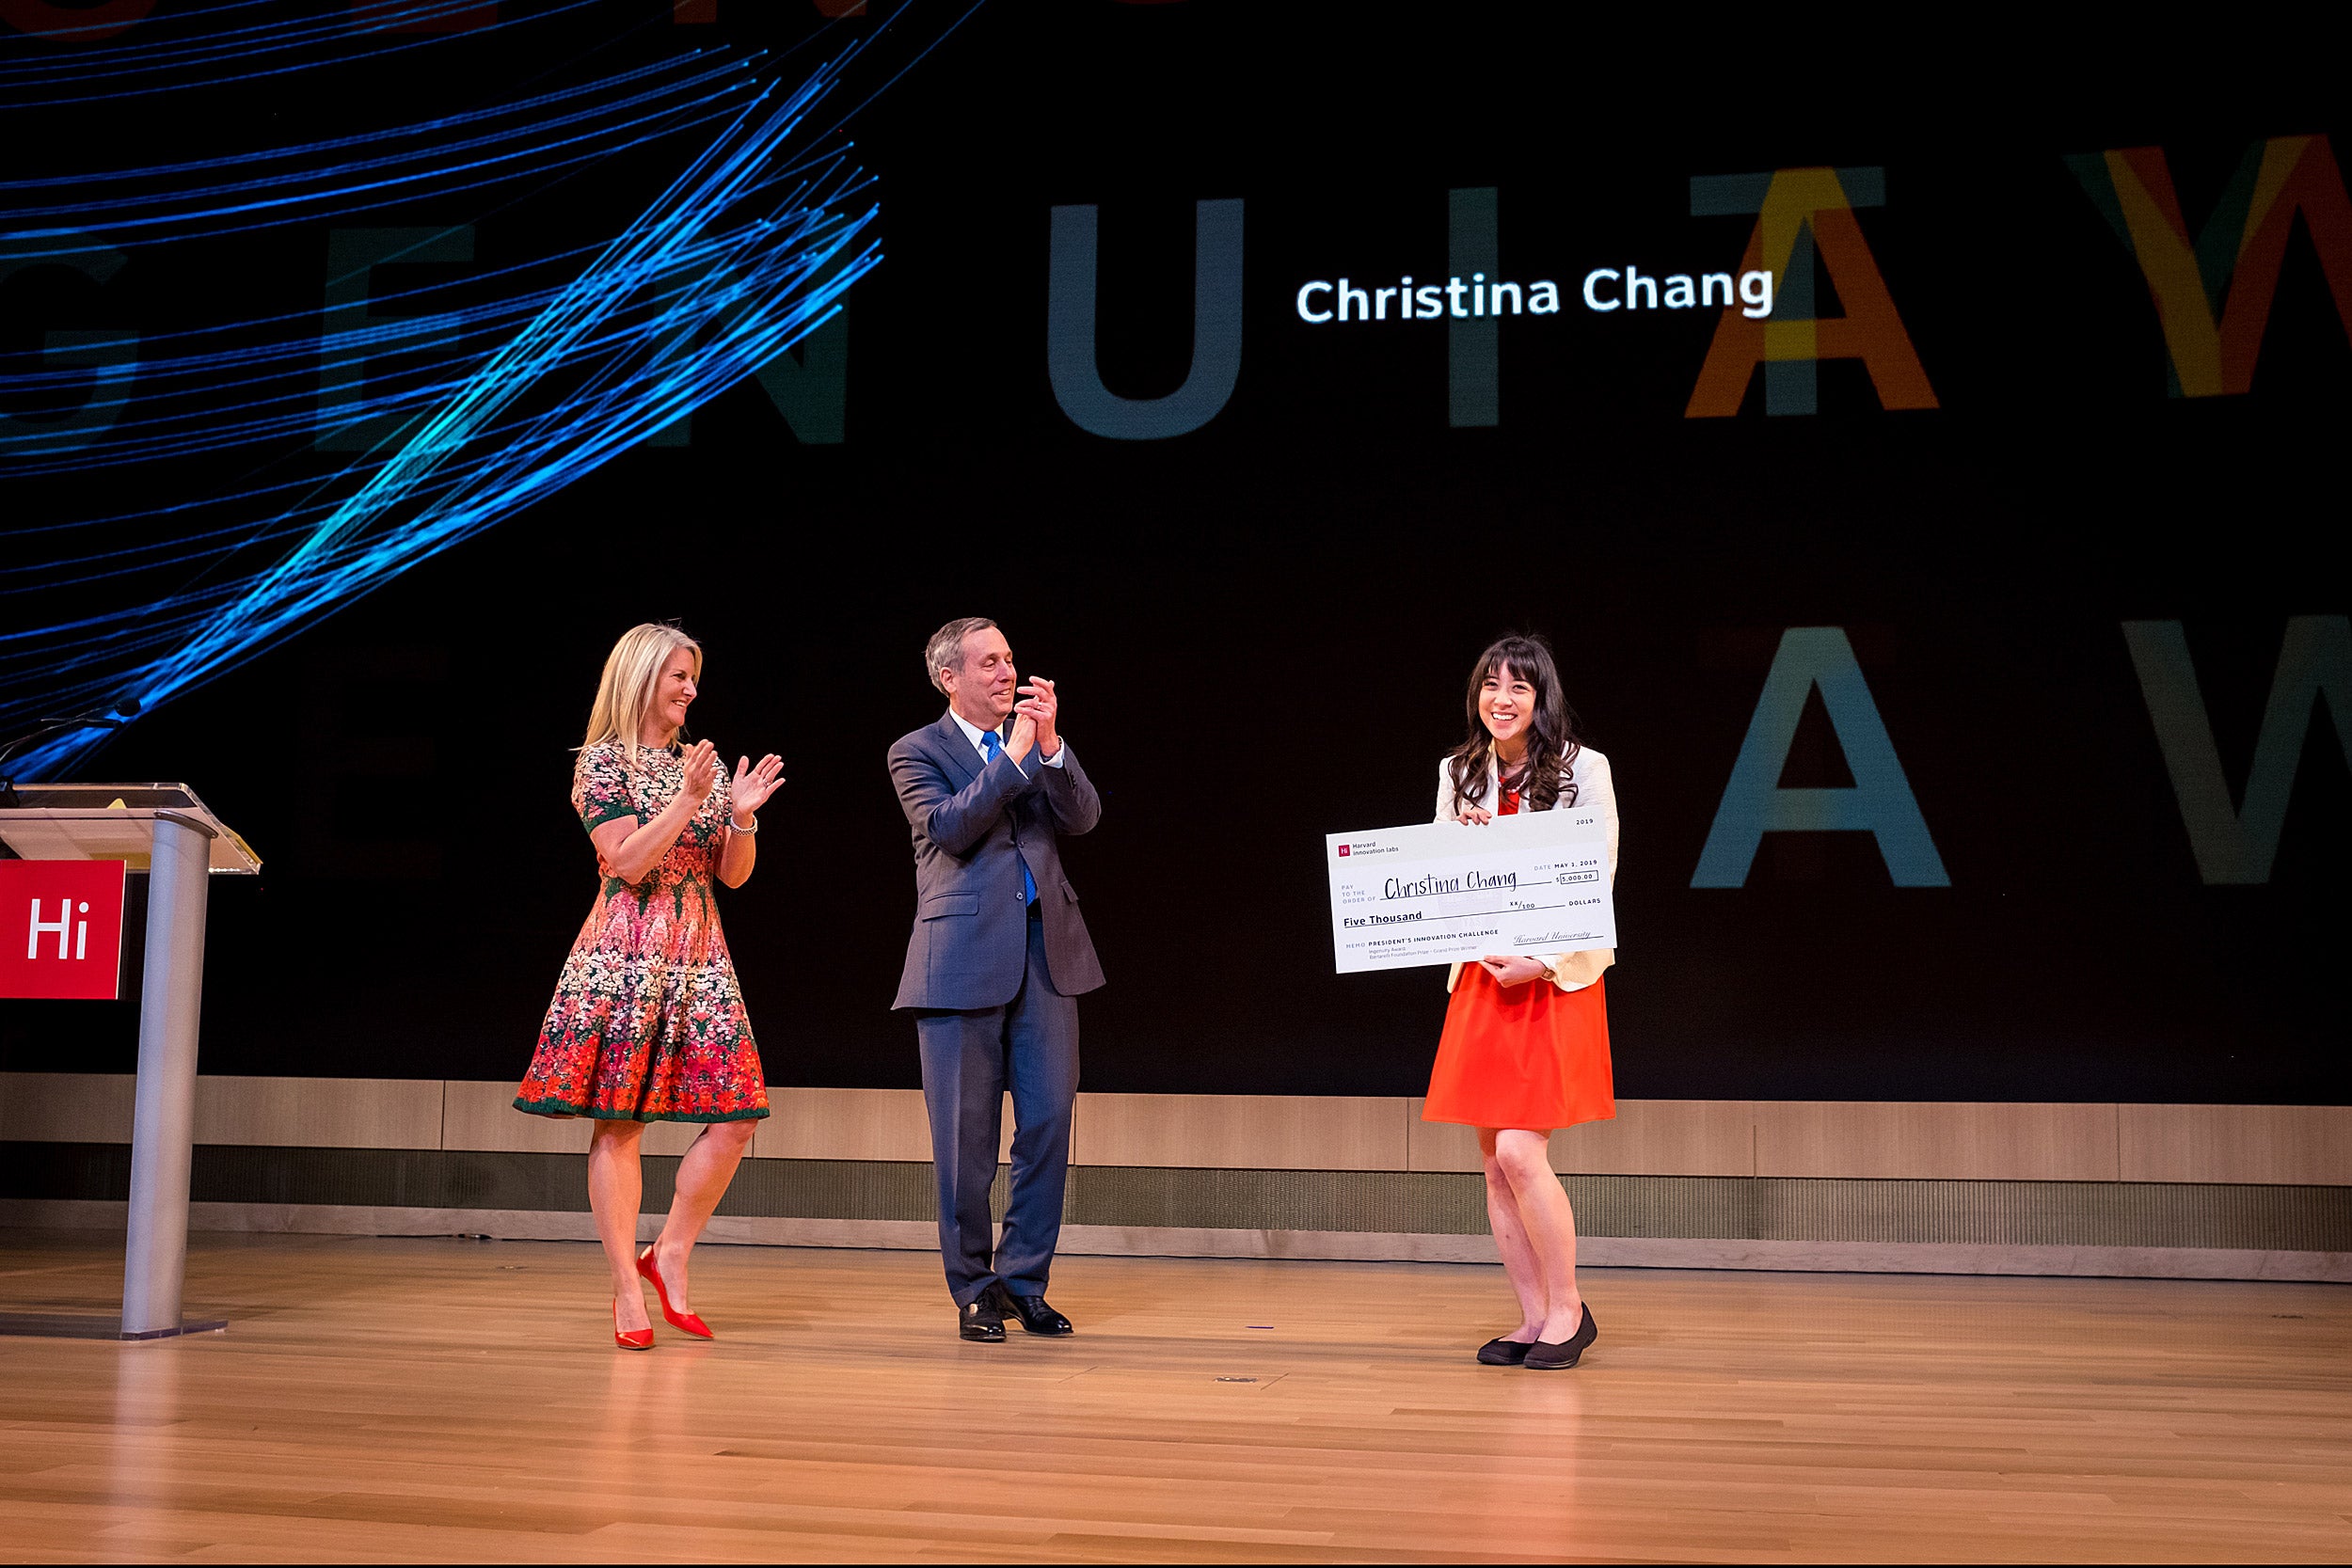 Bacow and Goldstein congratulate Christina Chang